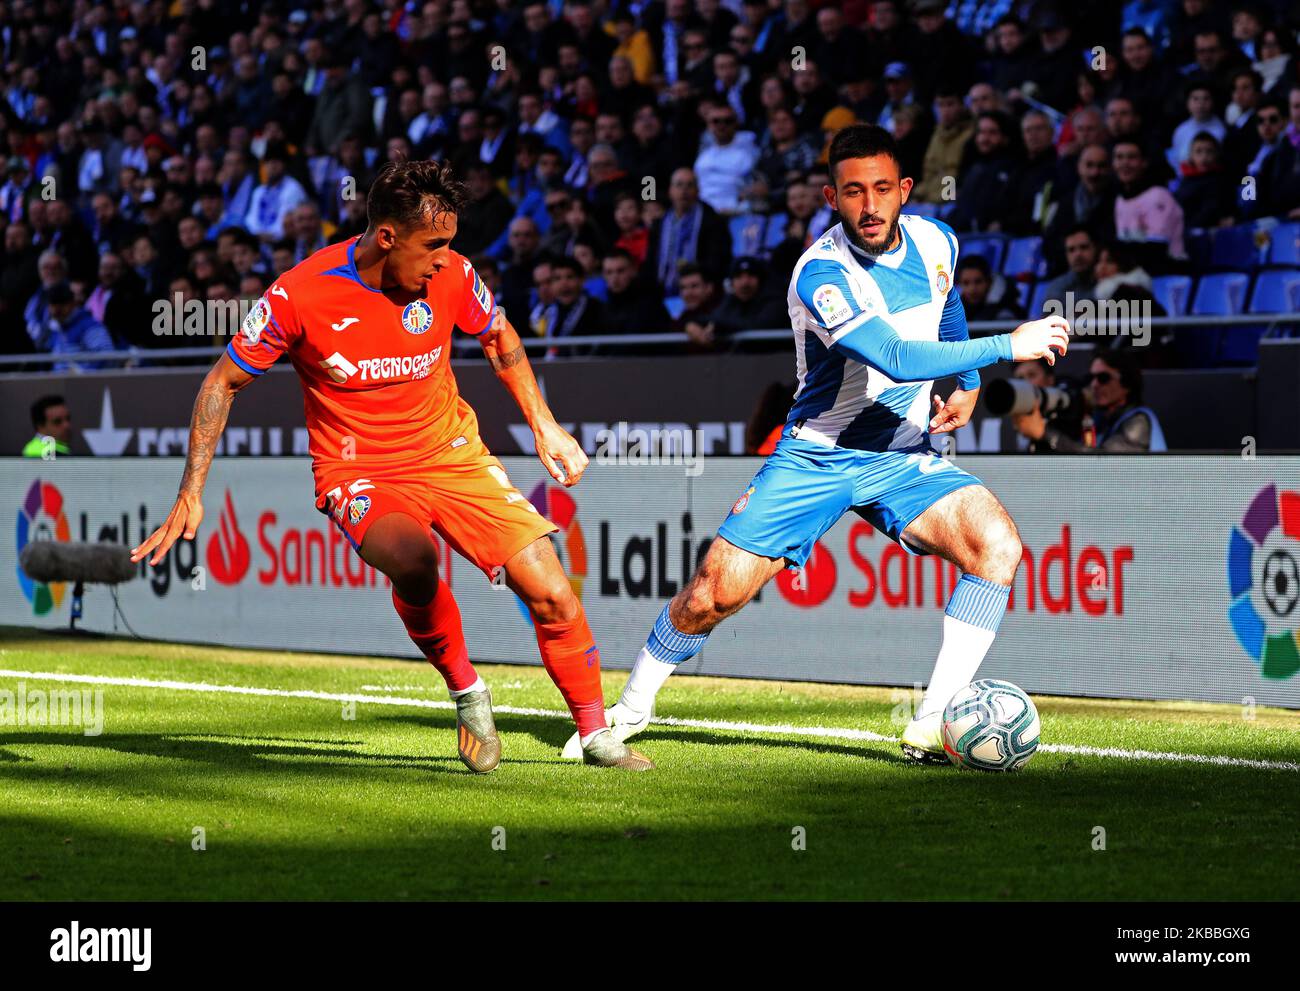 Matias Vargas and Damian Suarez during the match between RCD Espanyol and Getafe CF, played at the RCDE stadium, corresponding to the week 14 of the Liga Santander, on 24 November 2019, in Barcelona, Spain. (Photo by Joan Valls/Urbanandsport /NurPhoto) Stock Photo